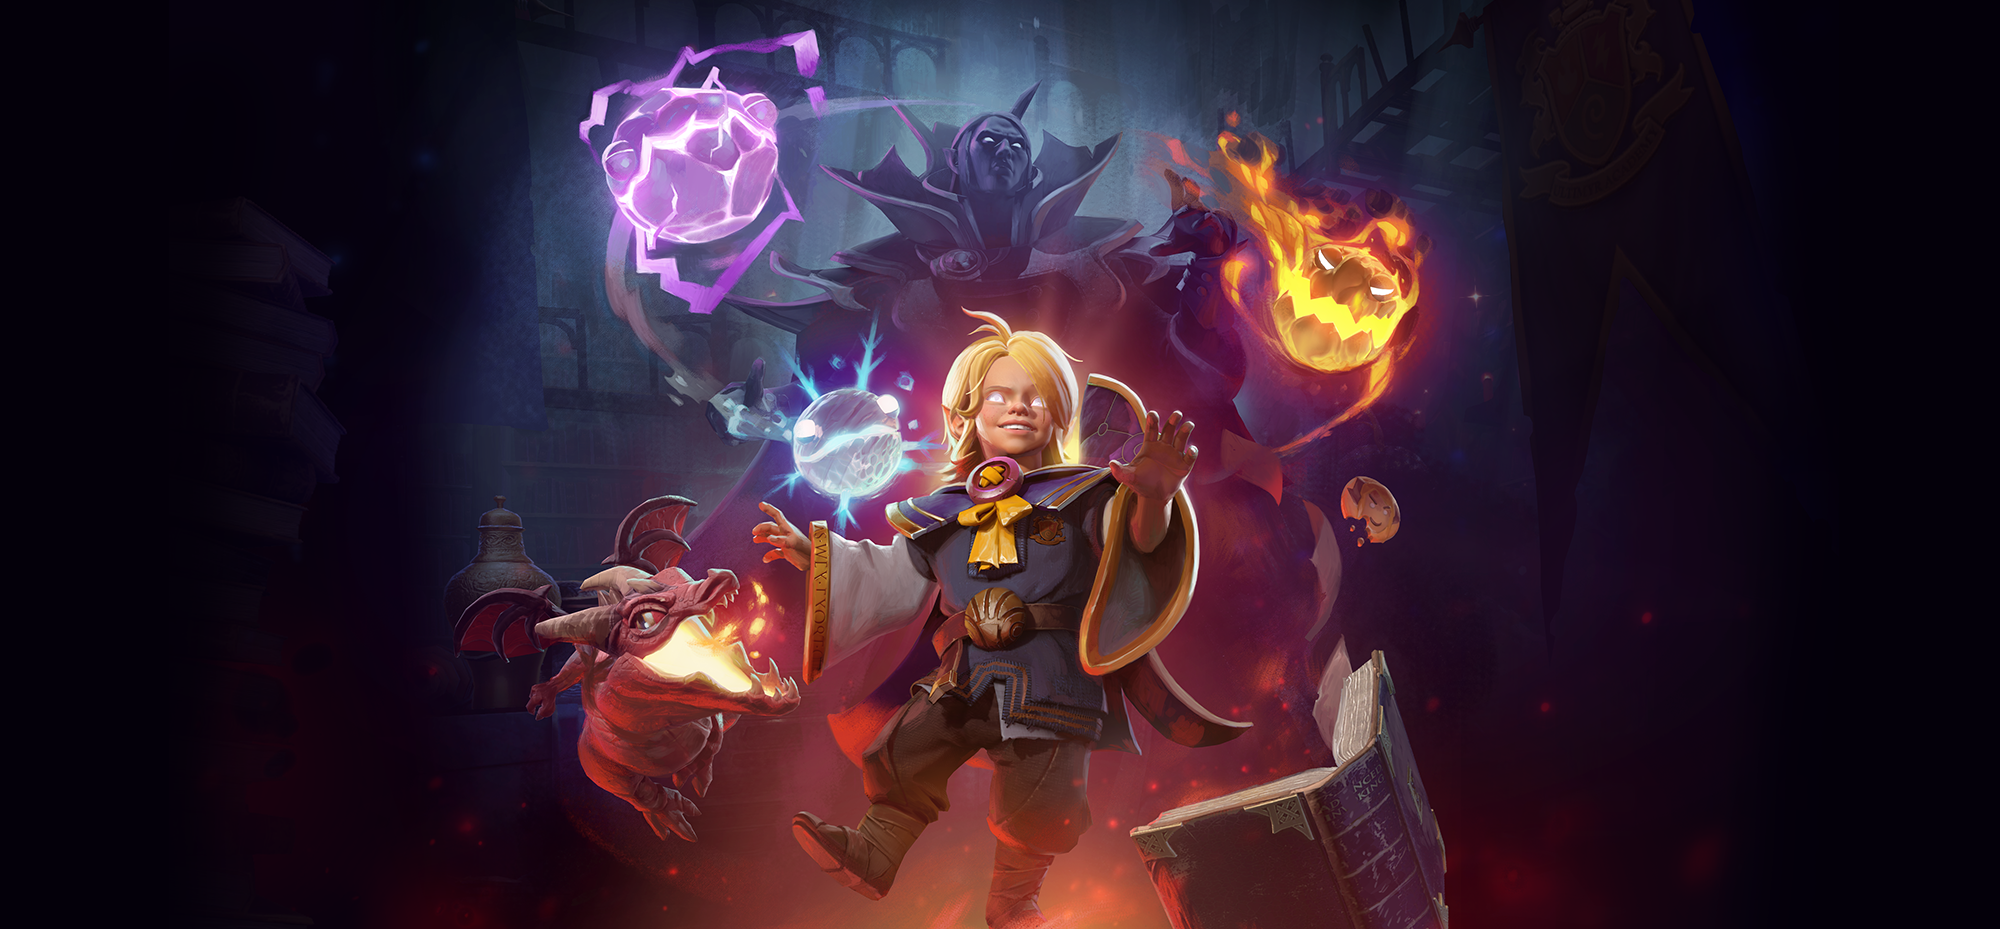 Dota 2 - ACOLYTE OF THE LOST ARTS | Young Invoker Hero Persona